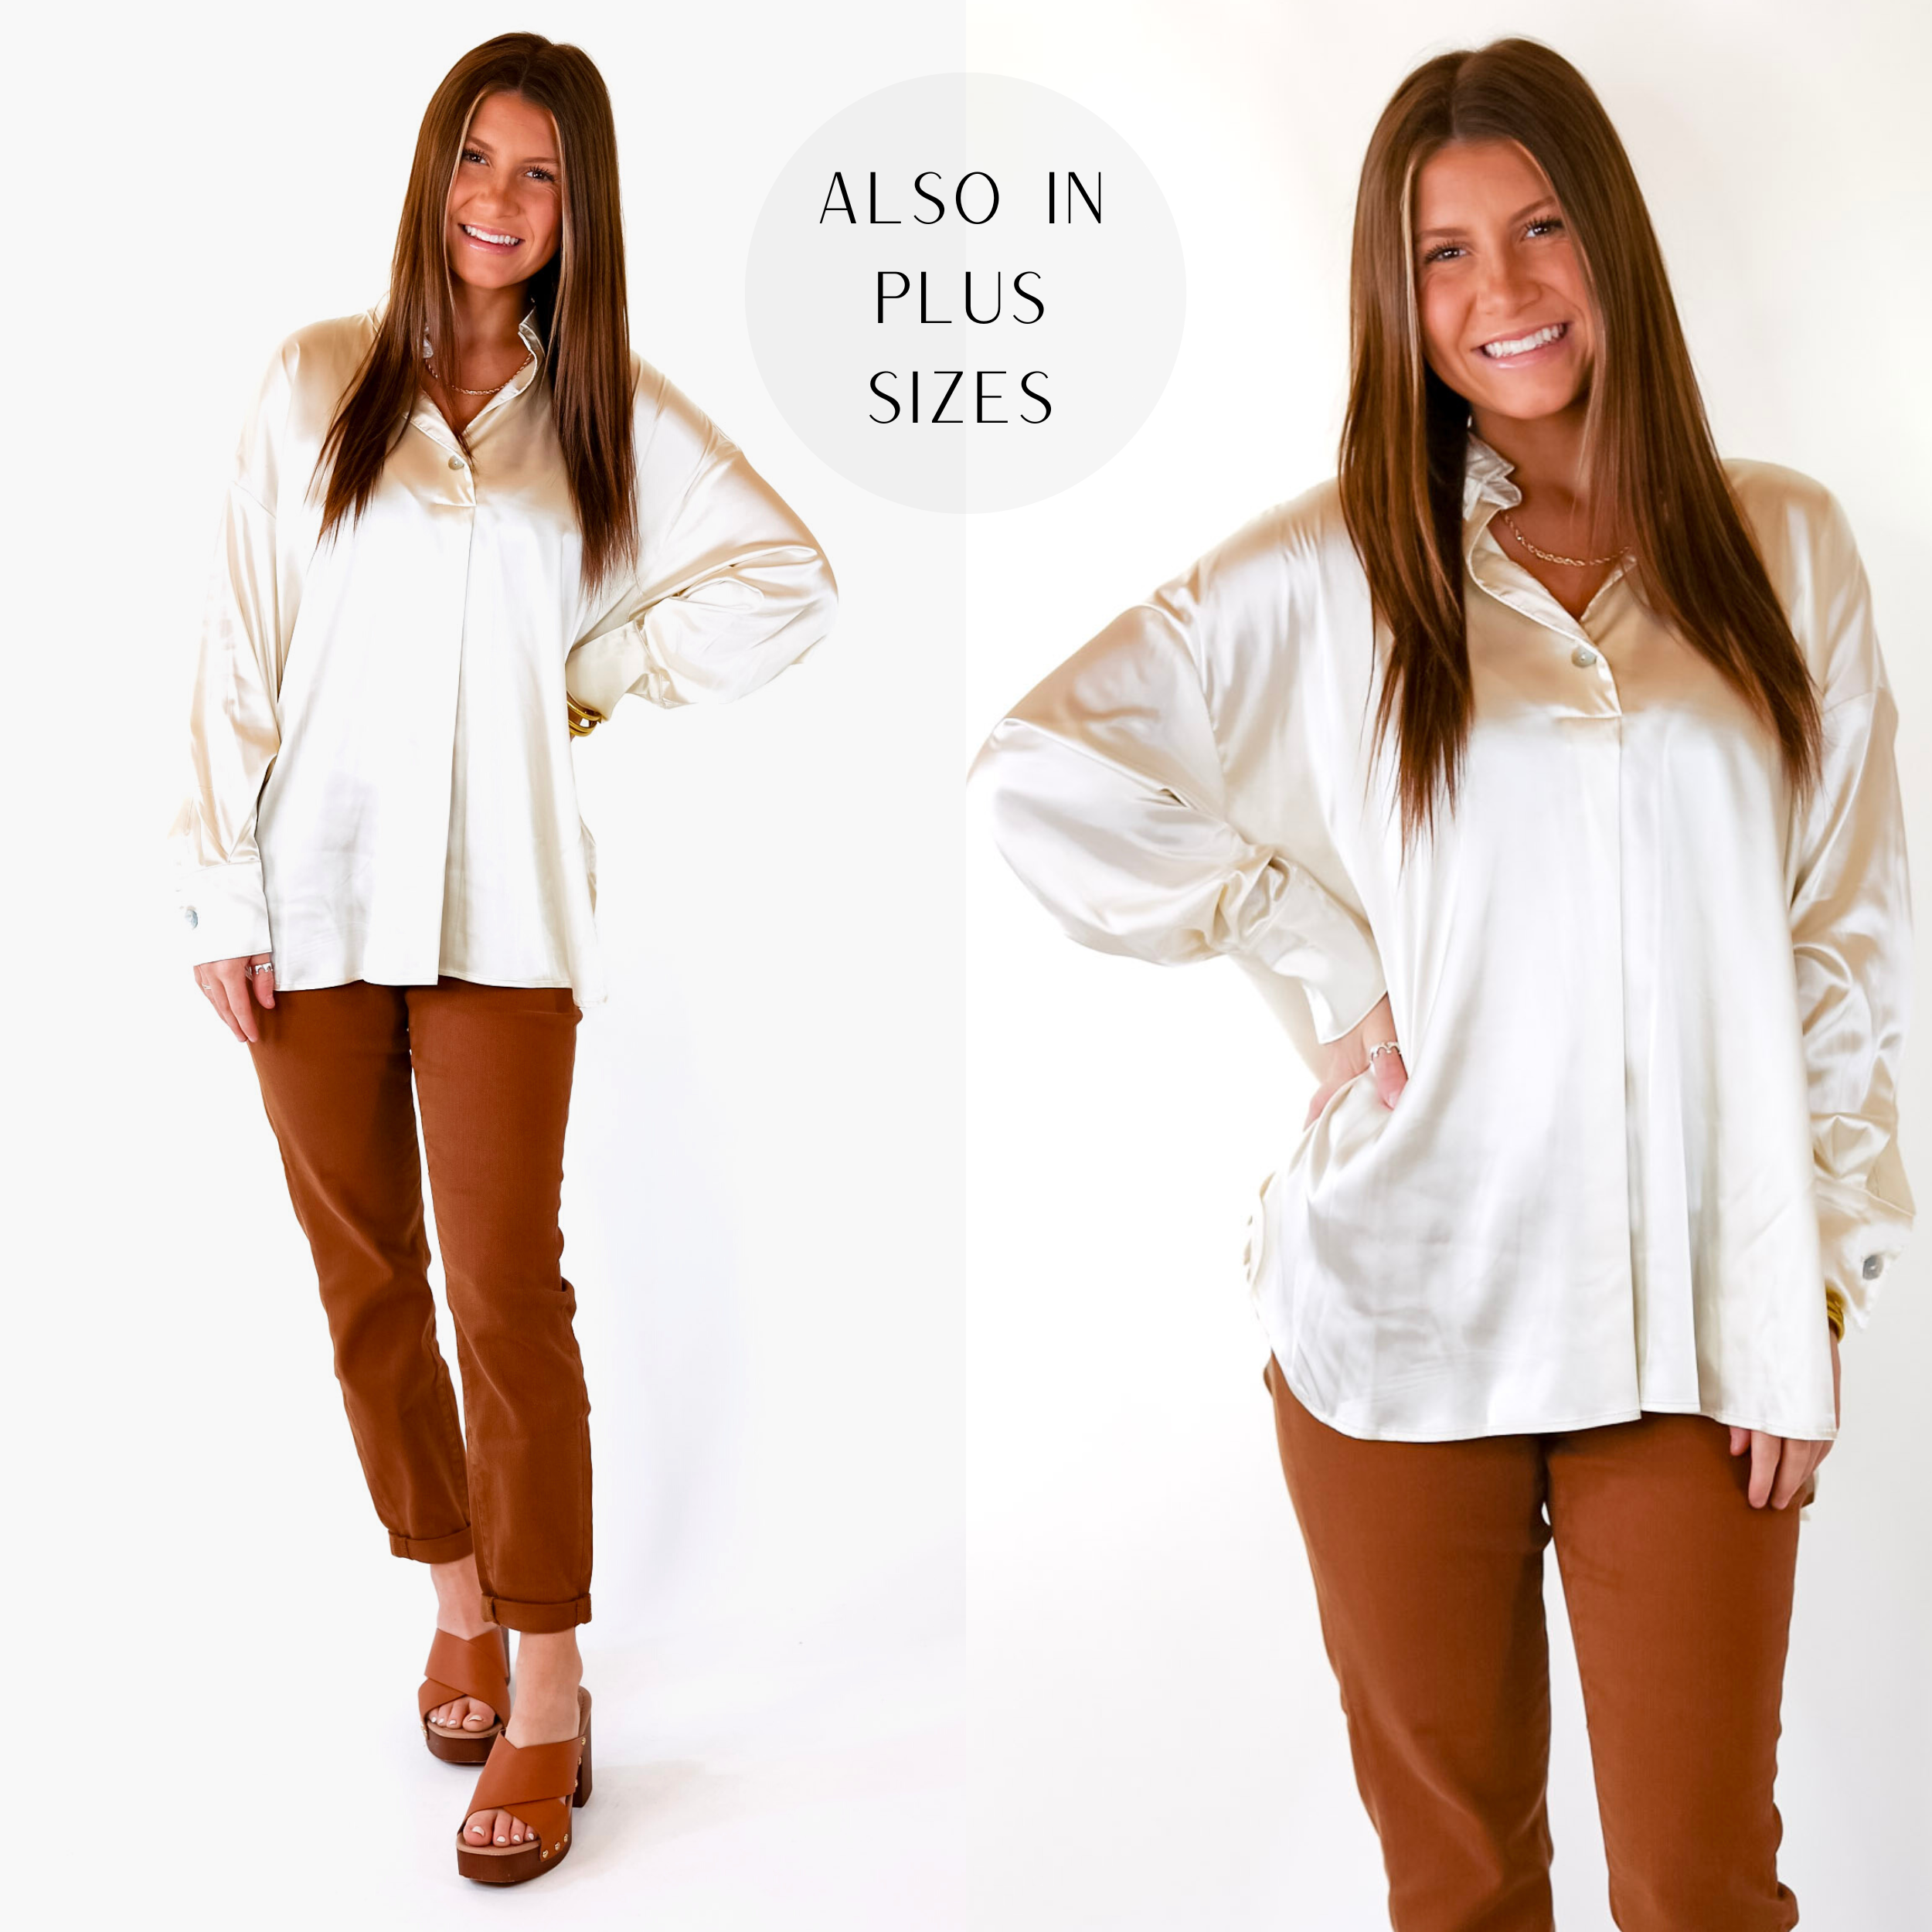 Start The Show Satin Long Sleeve Collared Top in Ivory - Giddy Up Glamour Boutique